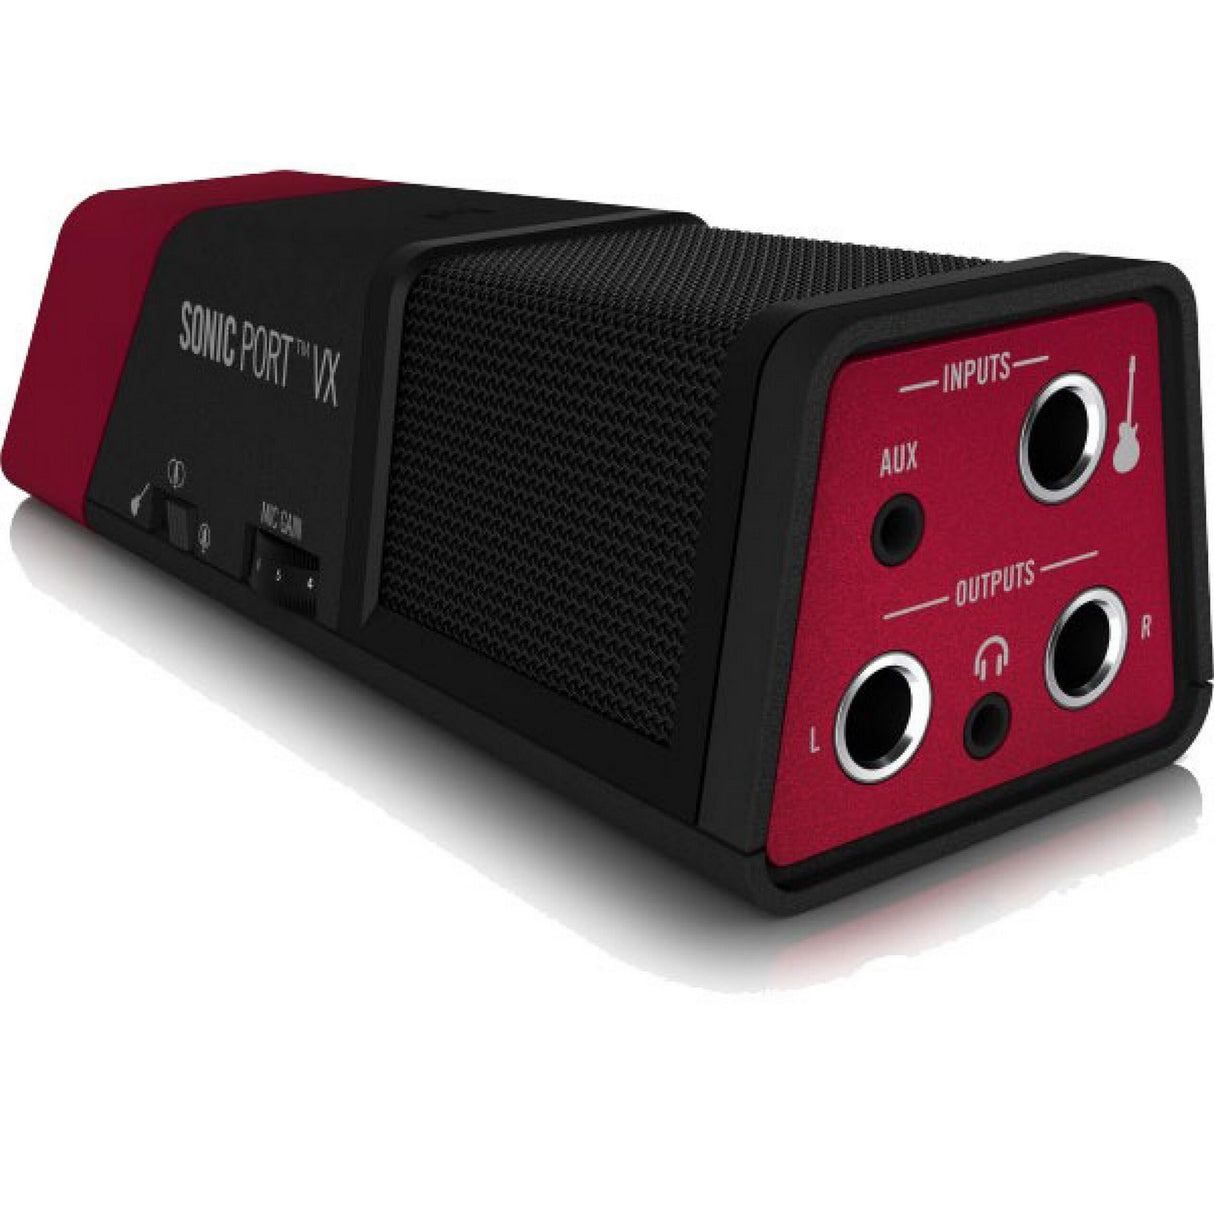 Line 6 Sonic Port VX Guitar System for iOS Devices